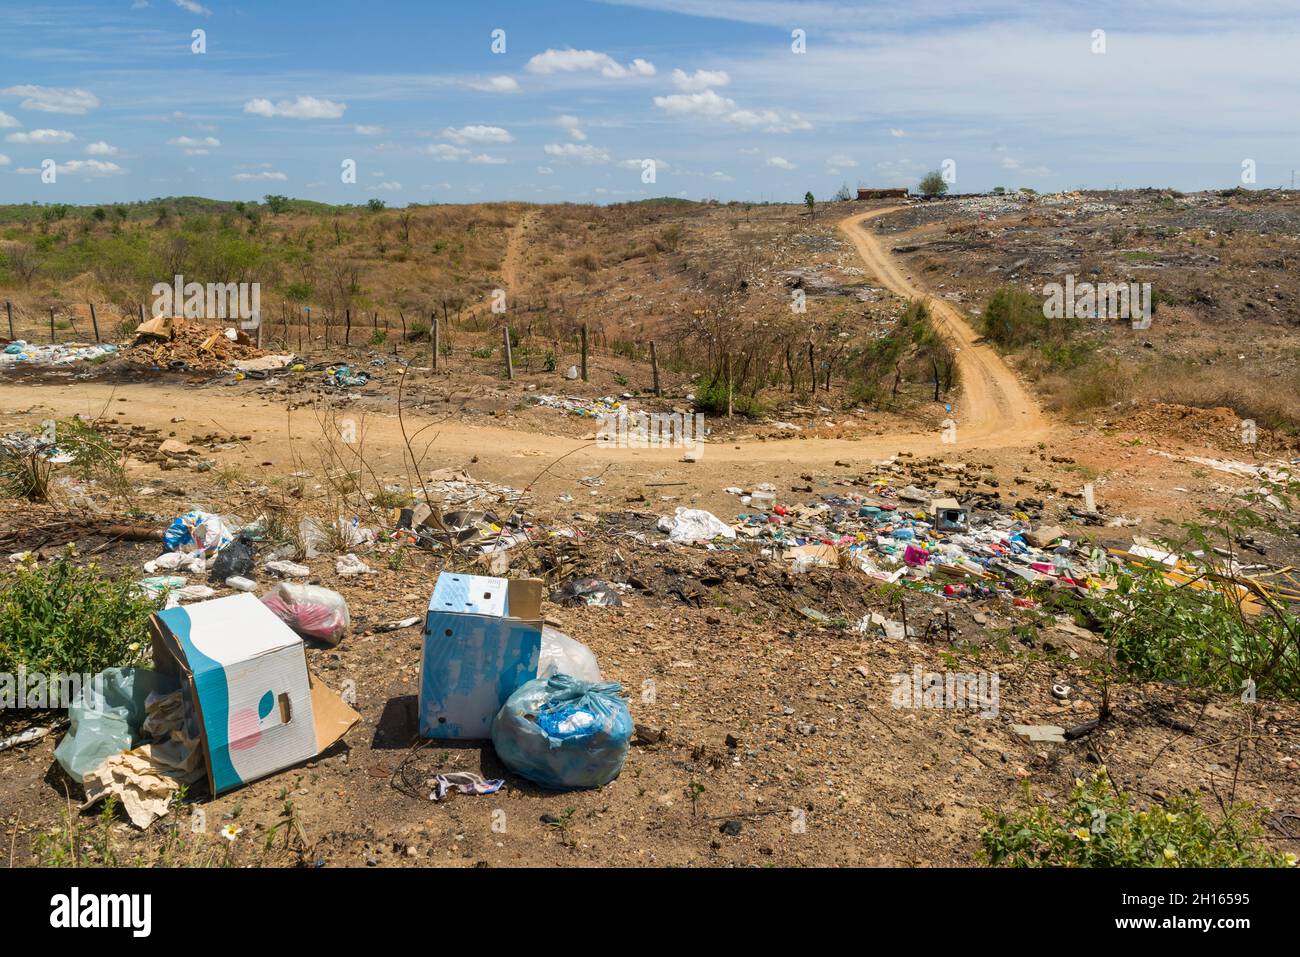 Garbage thrown into nature in Barro, Ceara, Brazil on December 21, 2020. Environmental pollution. Stock Photo